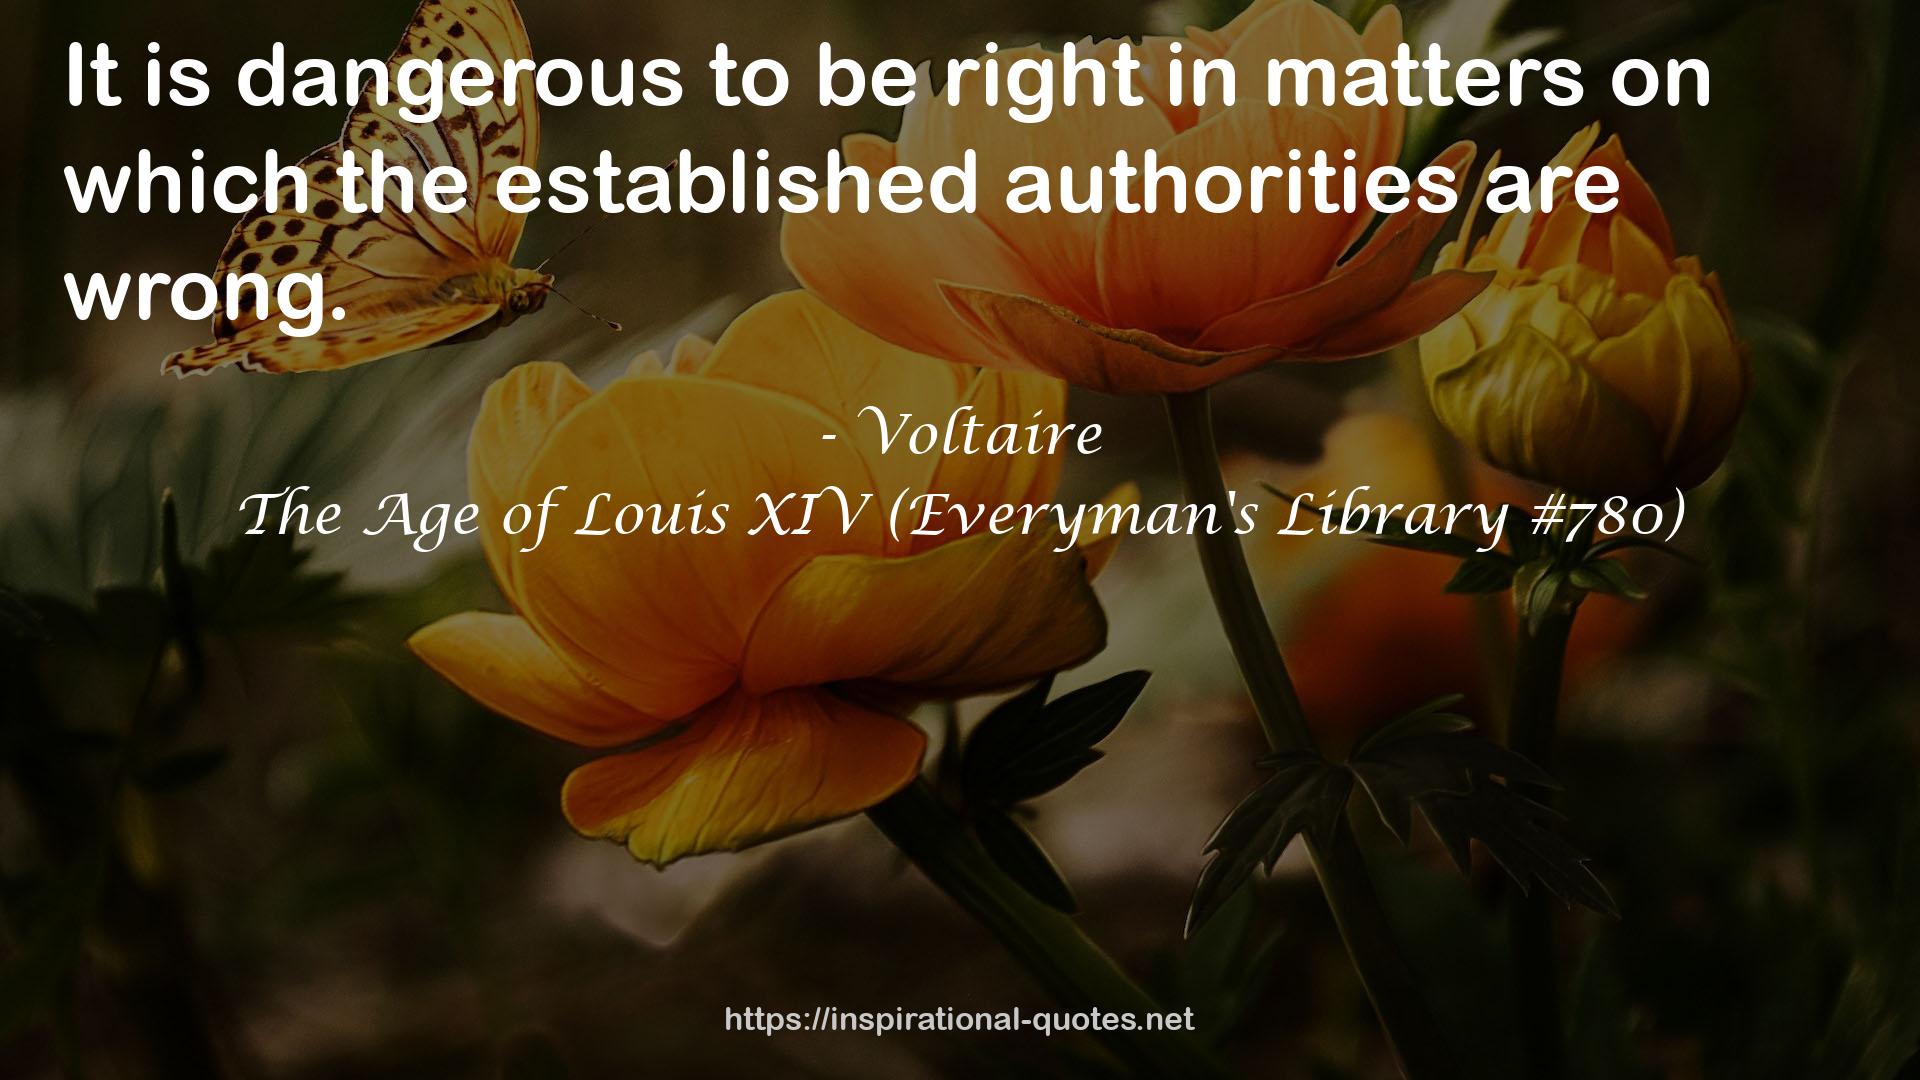 The Age of Louis XIV (Everyman's Library #780) QUOTES